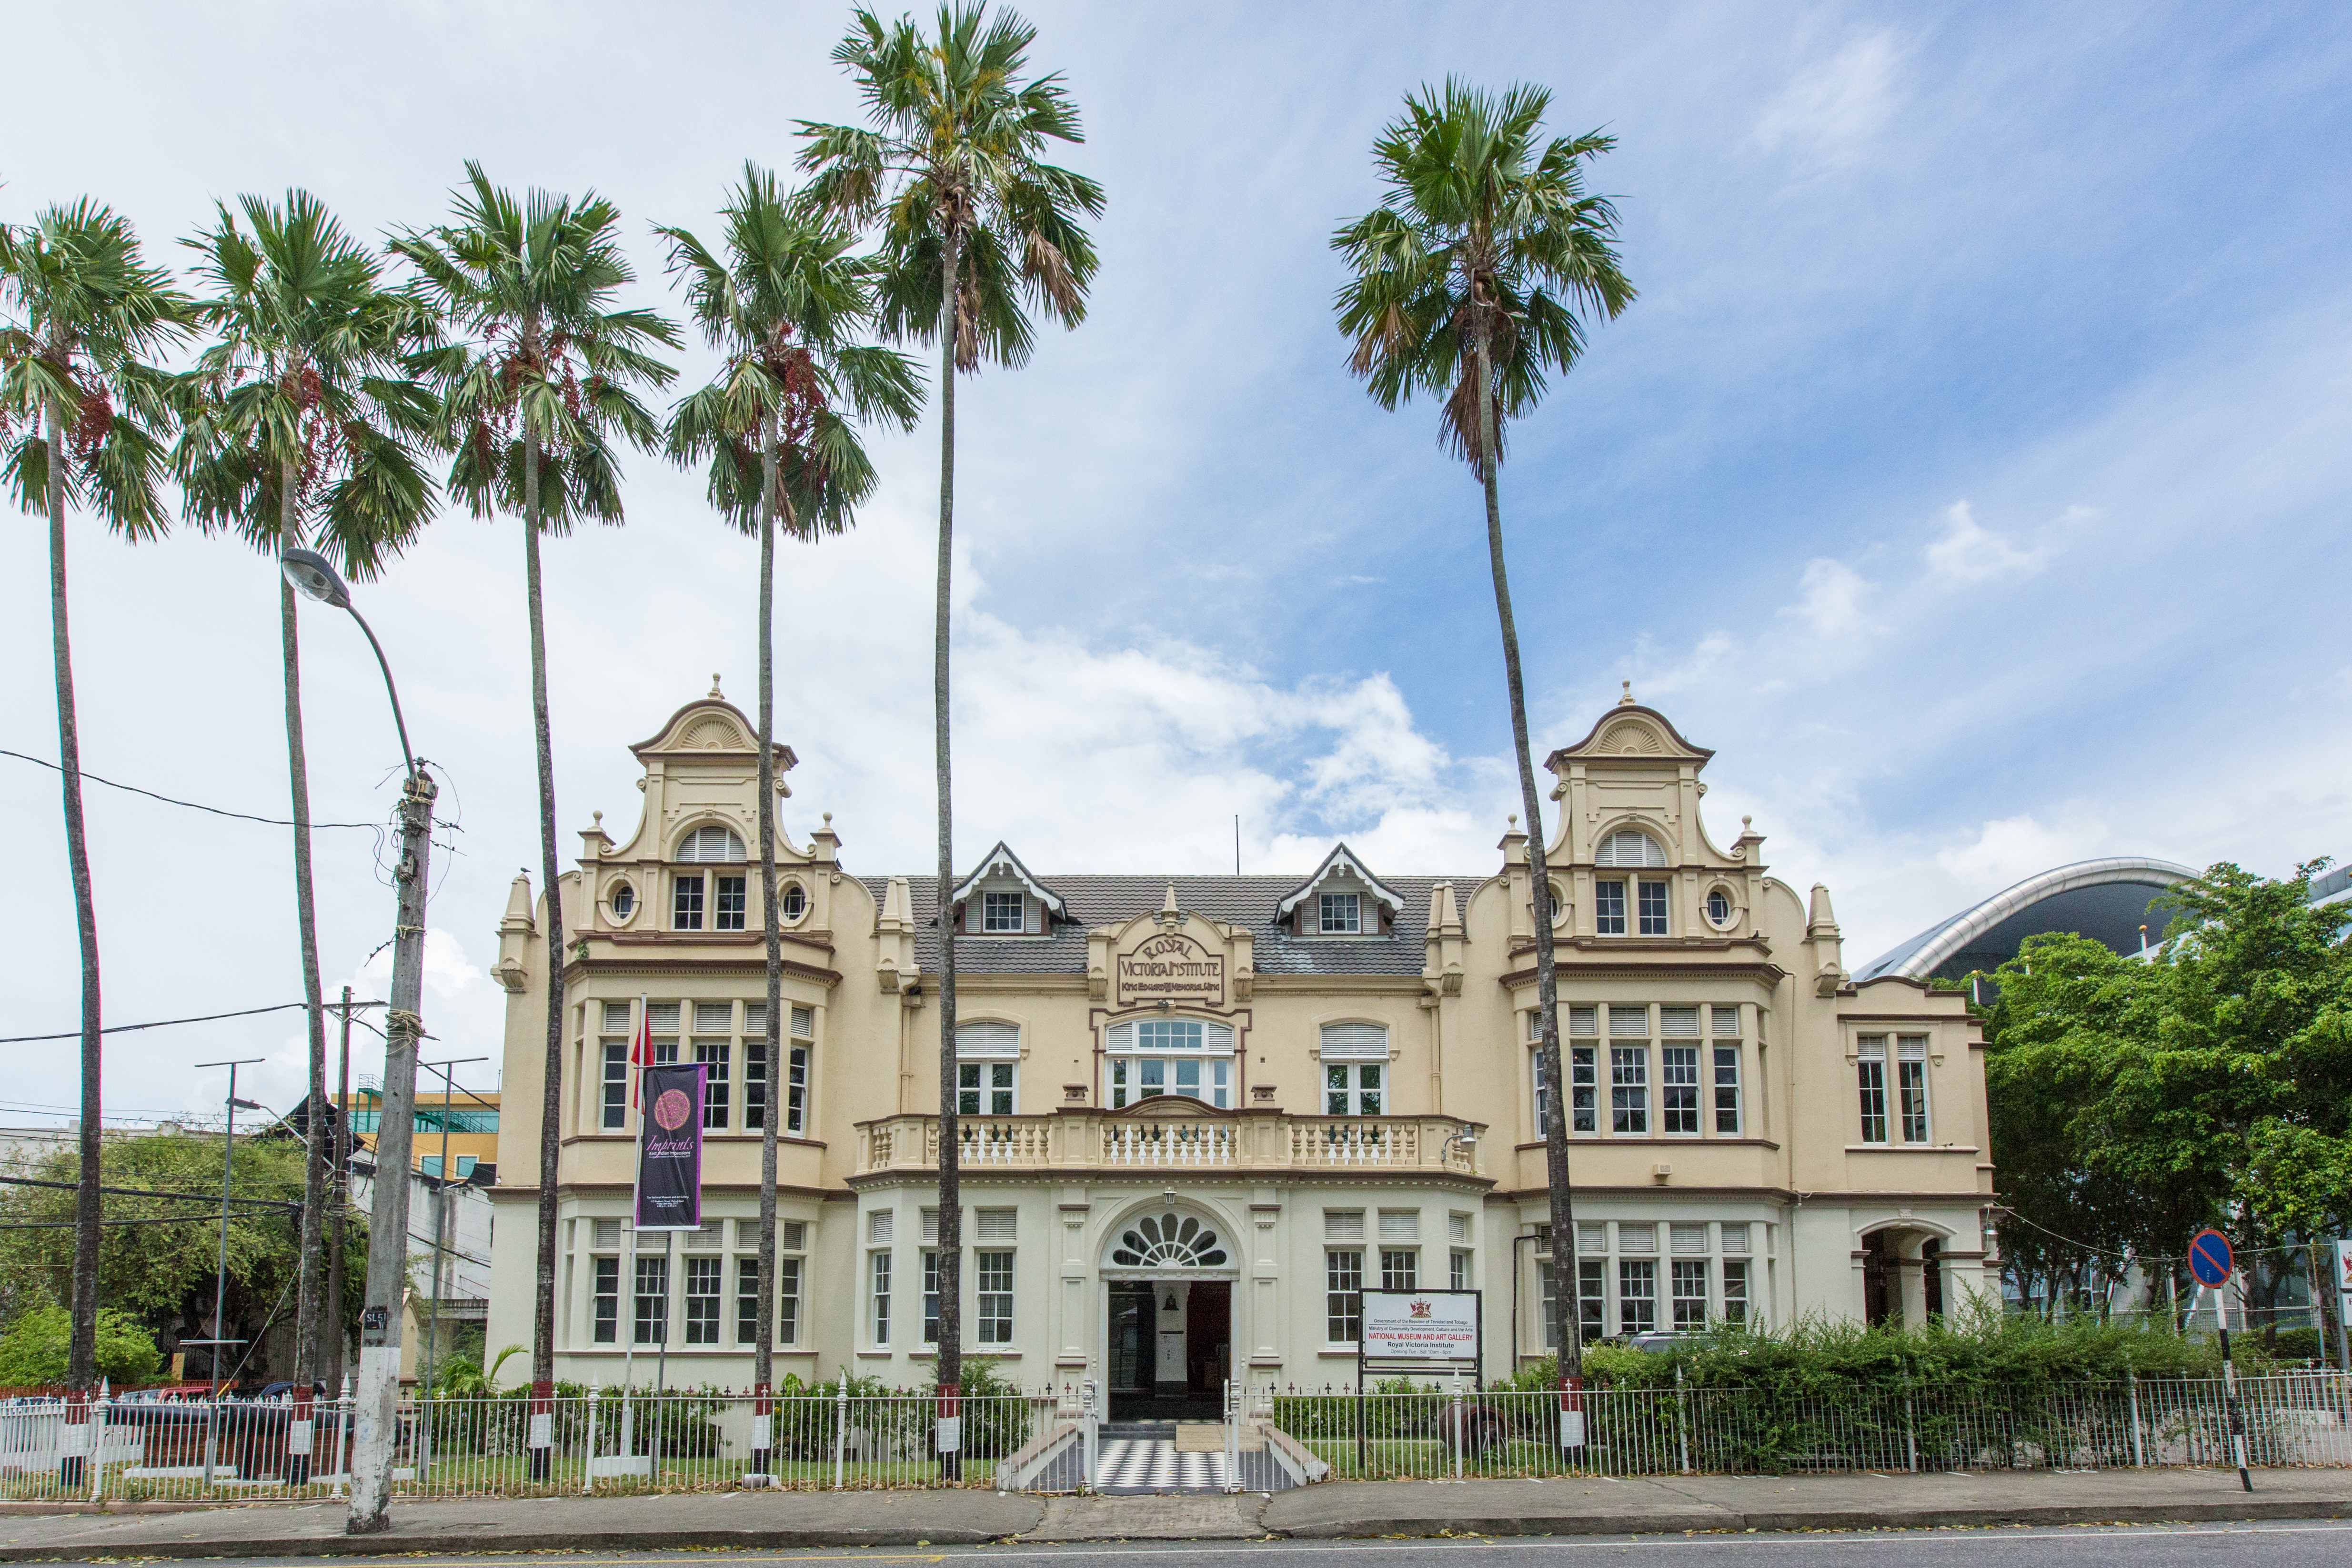 Royal Victoria Institute (National Museum and Art Gallery), Port of Spain, Trinidad and Tobago